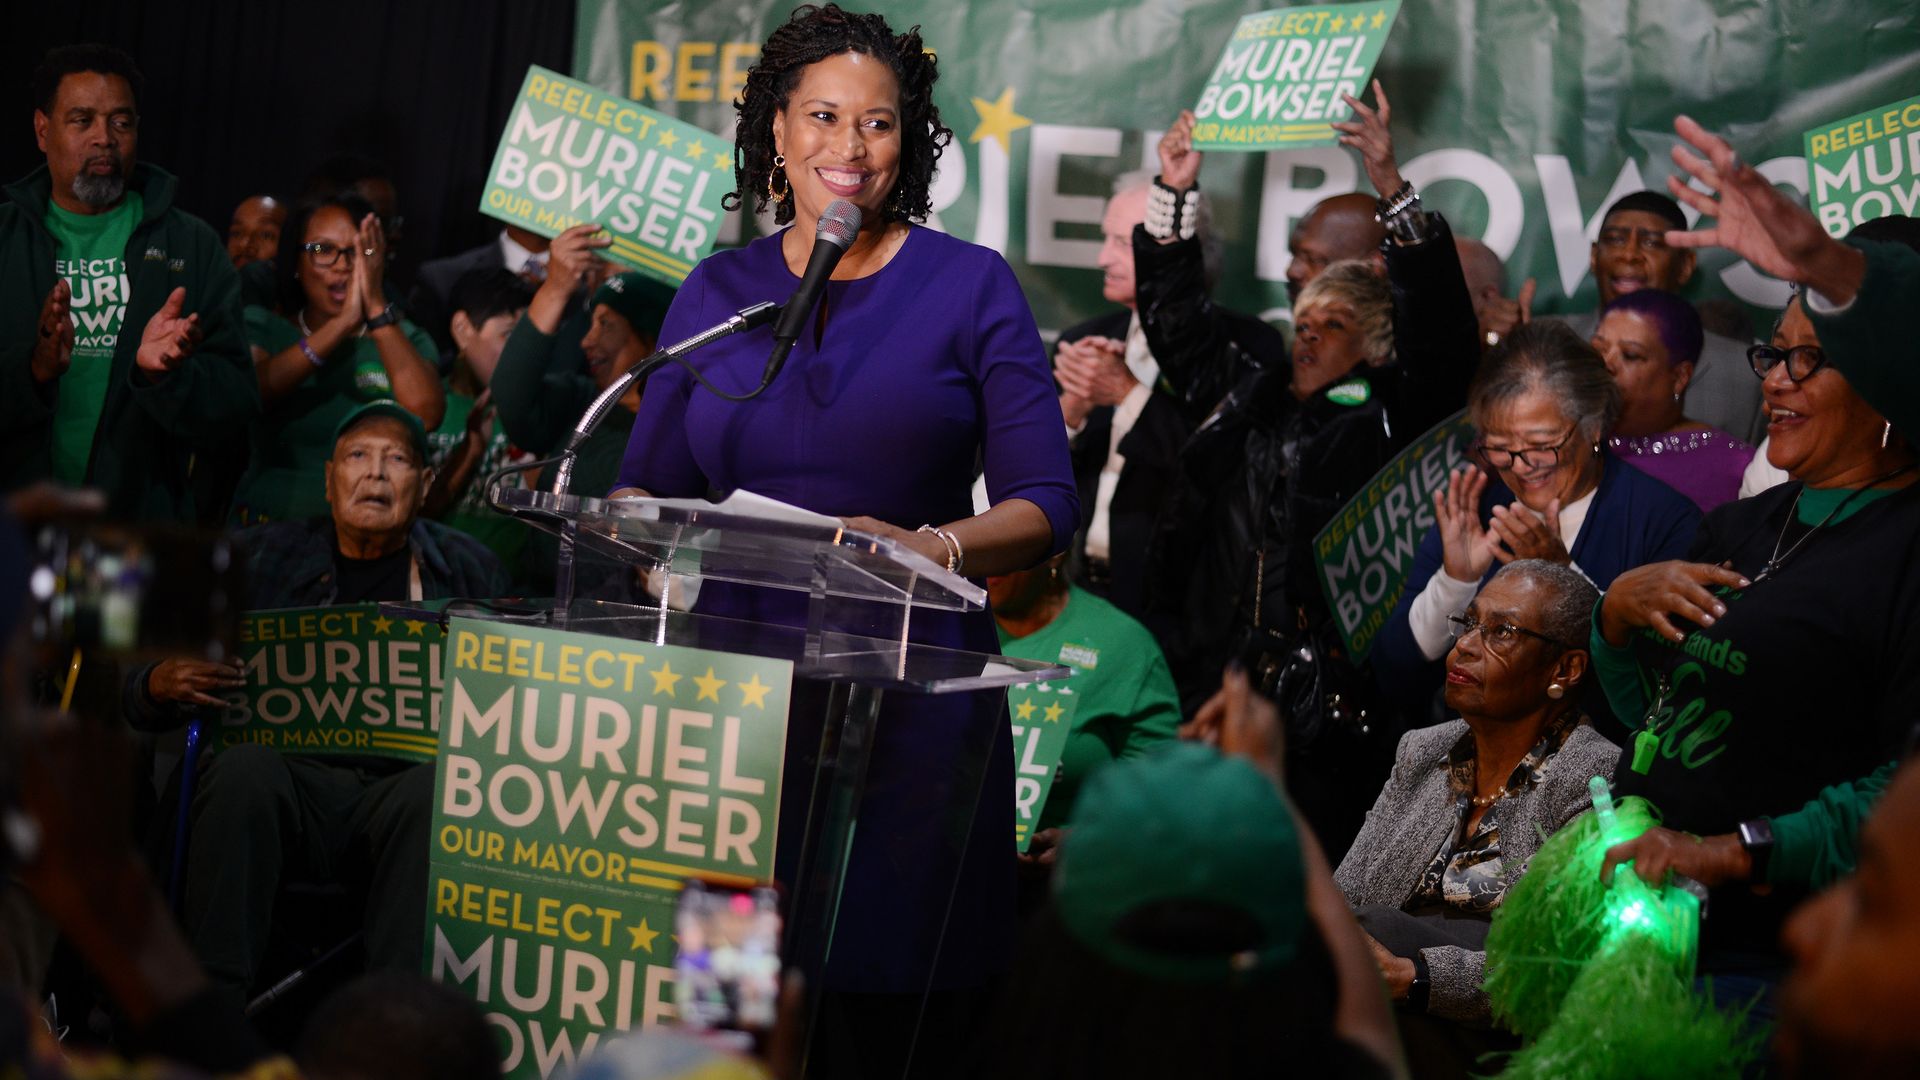 Muriel Bowser speaks at podium surrounded by supporters and family